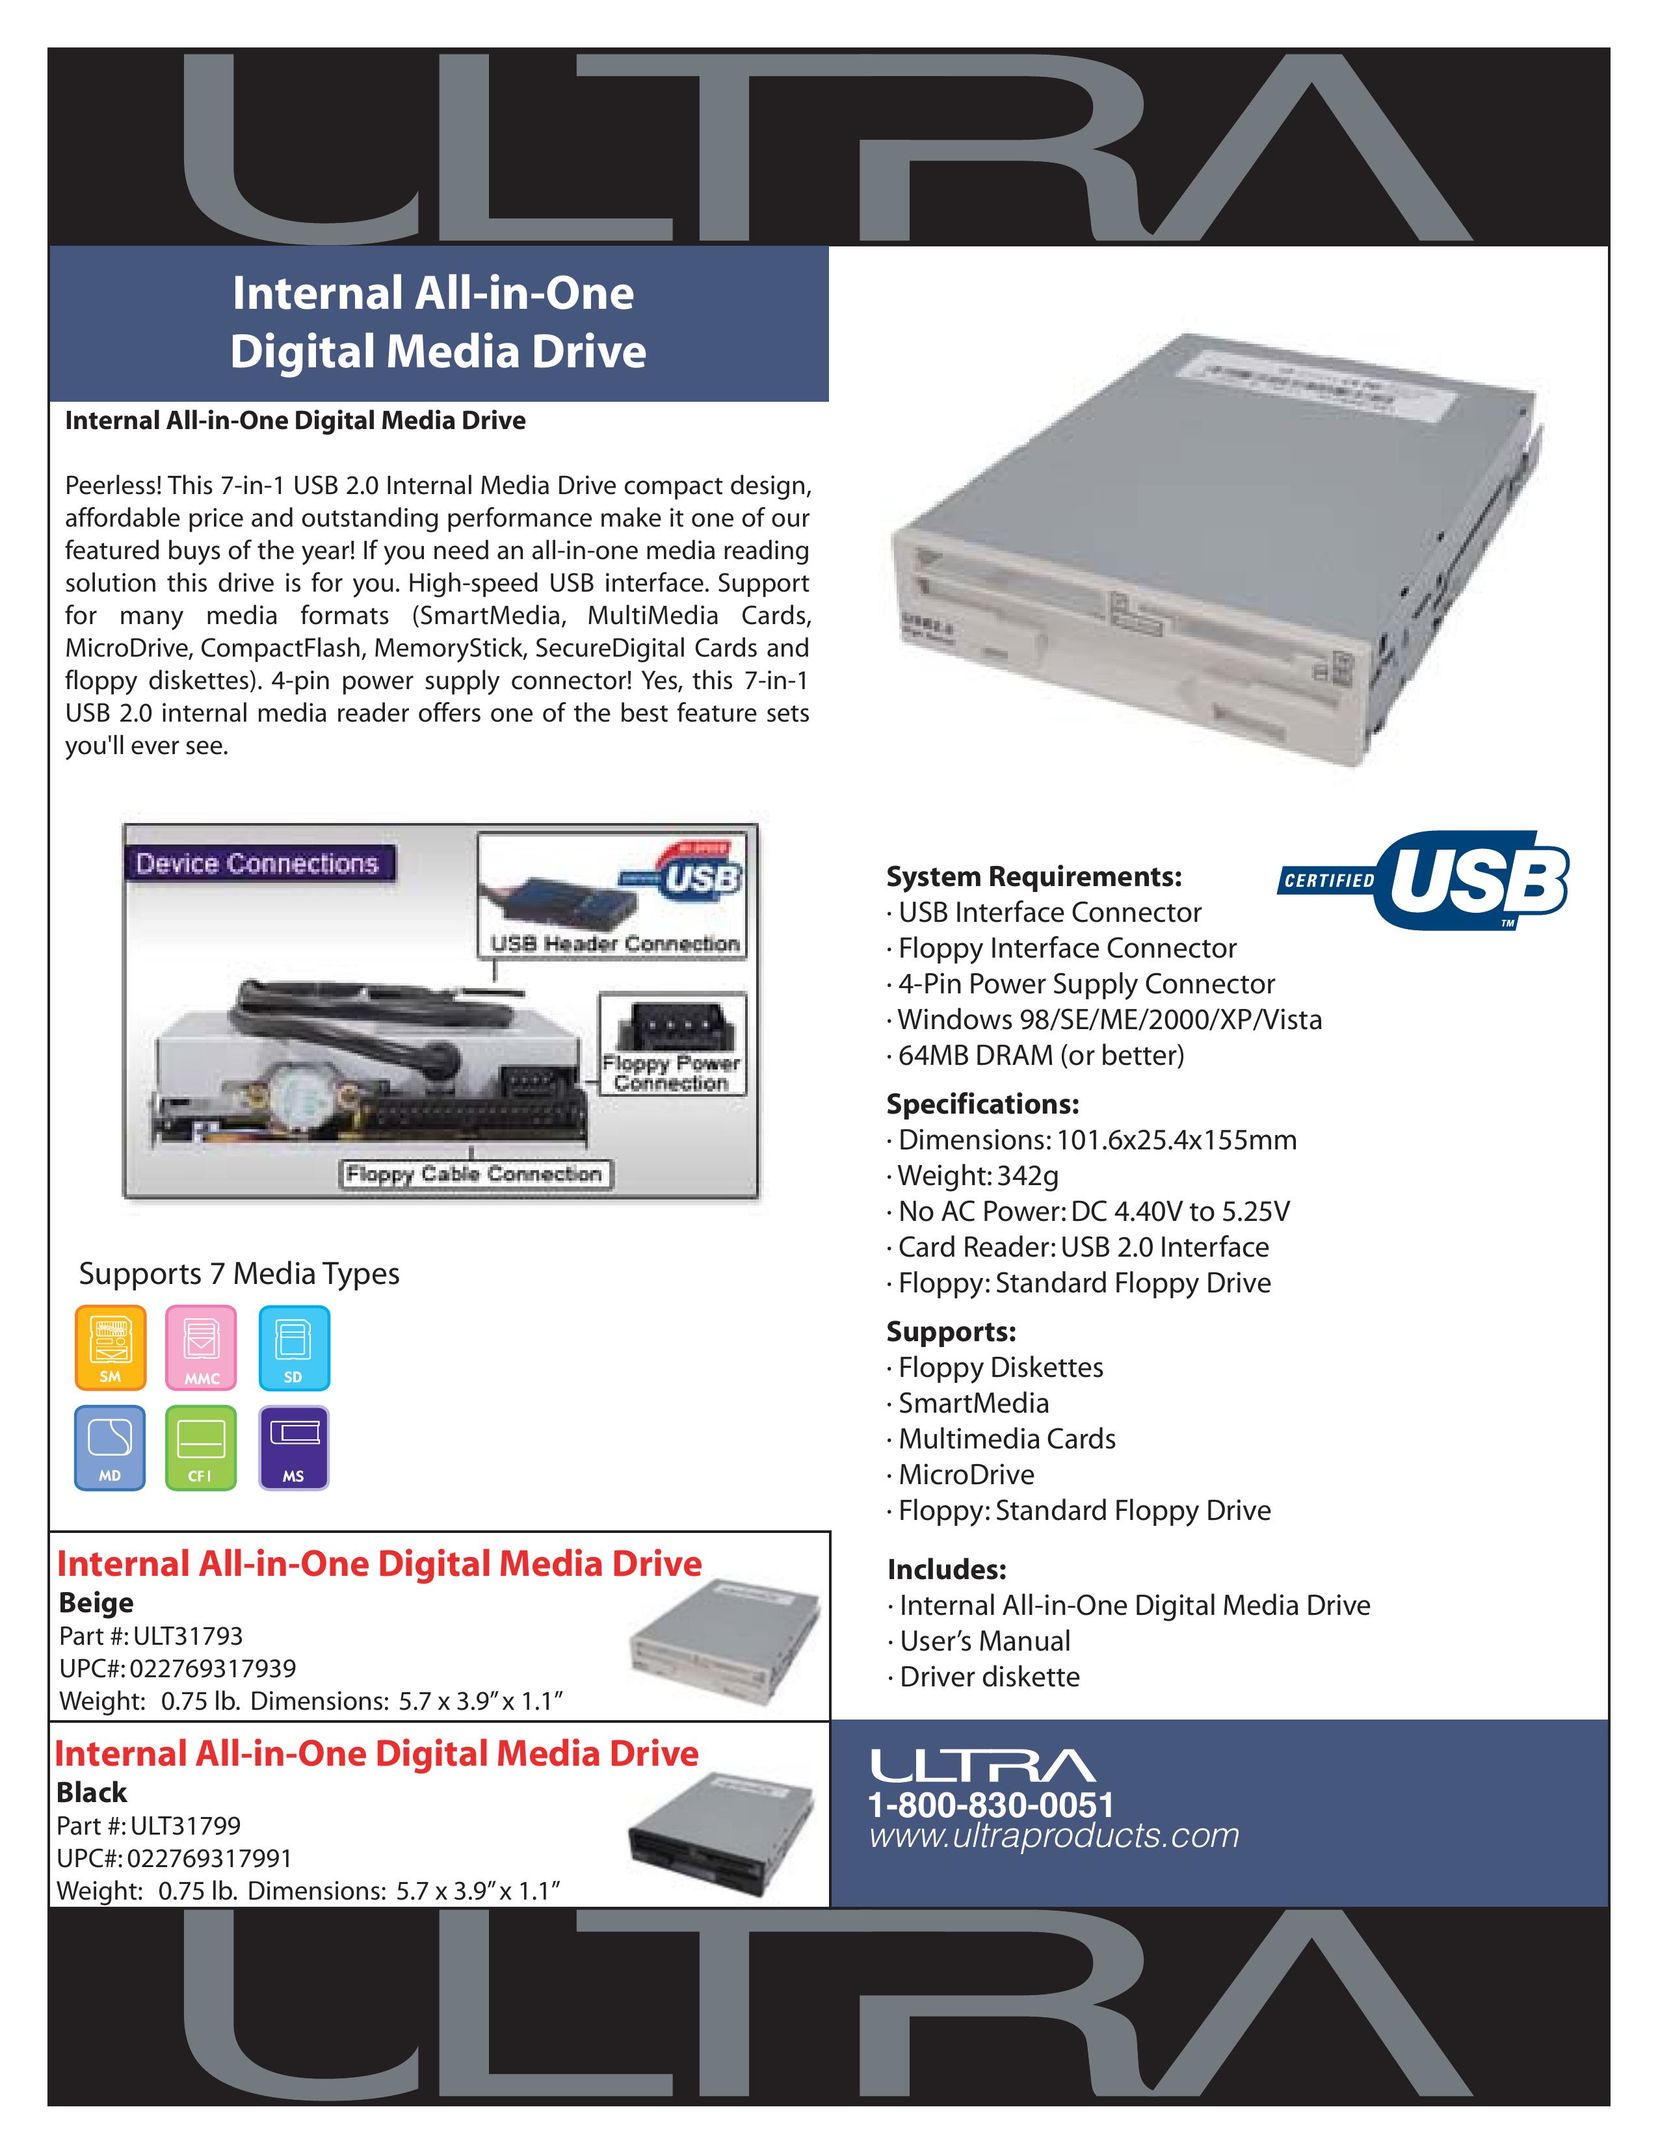 Ultra Products ULT31793 Network Card User Manual